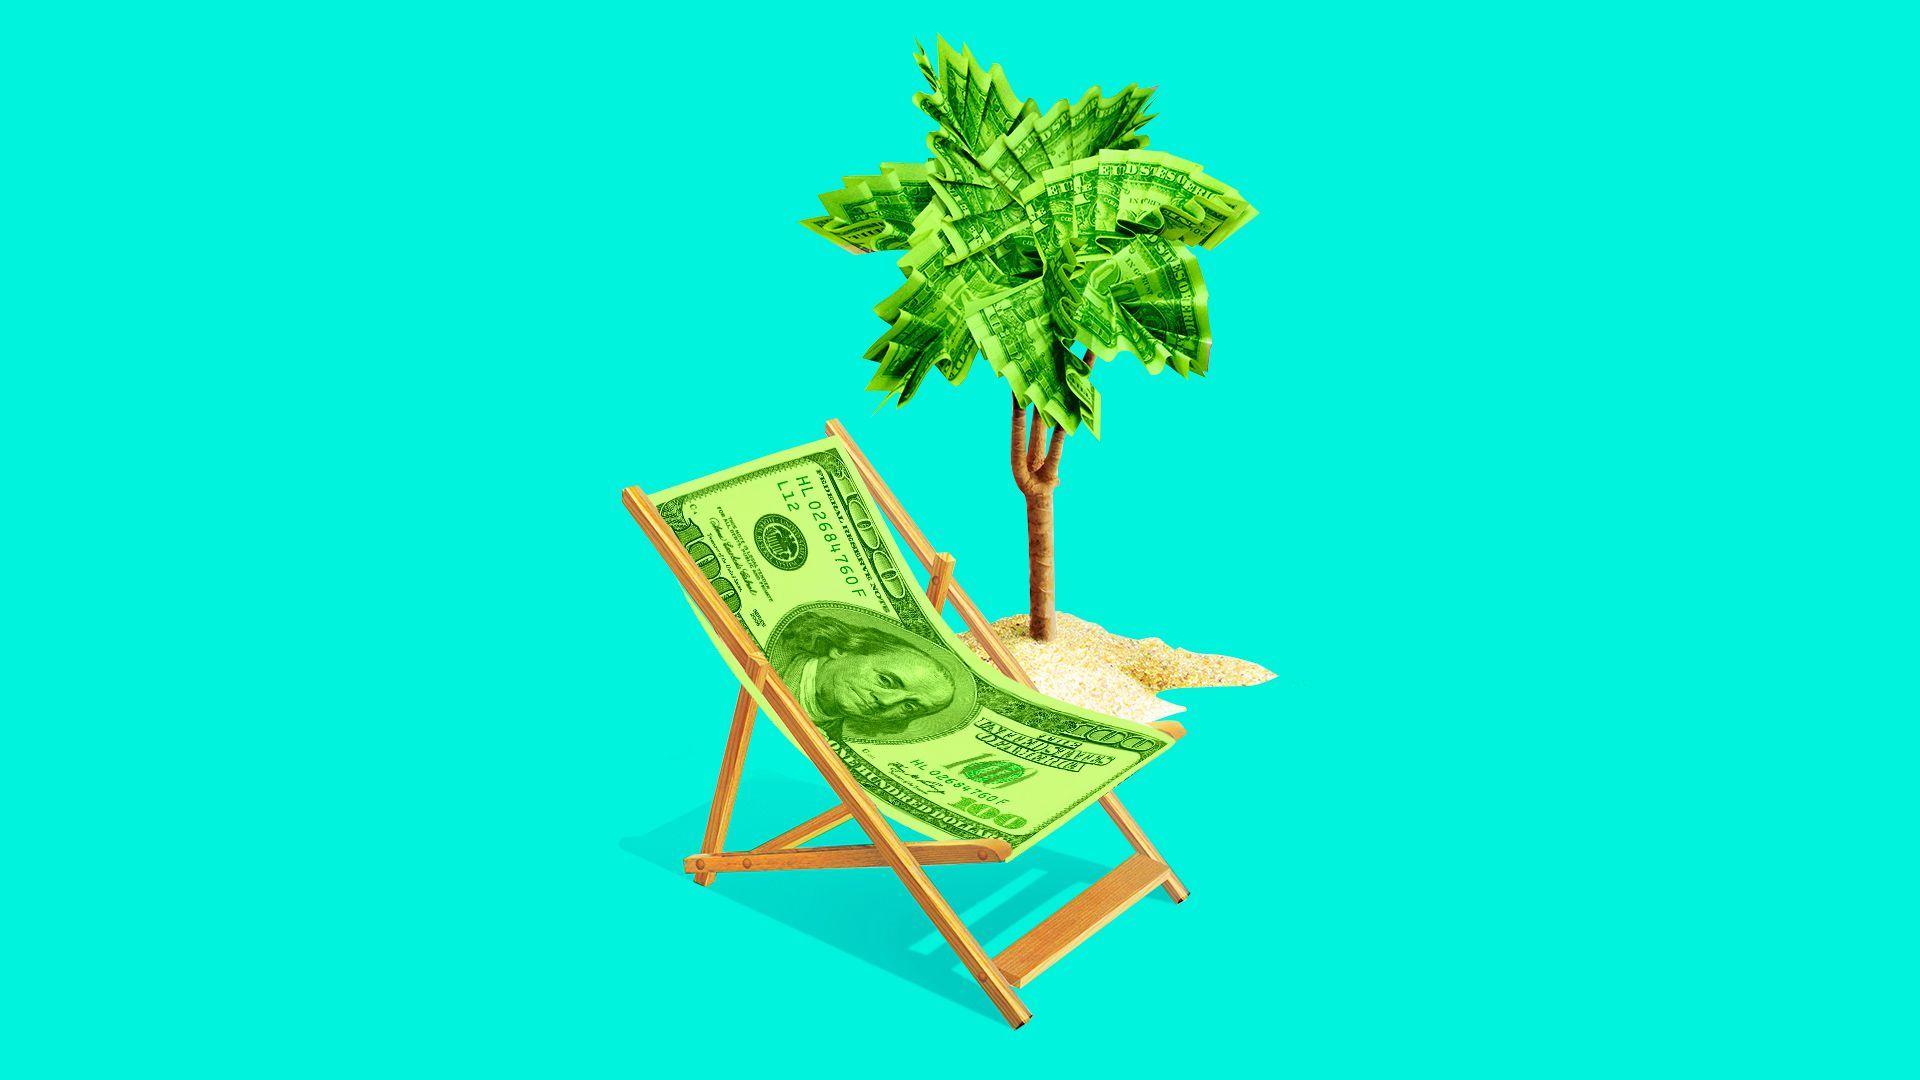 Illustration of a beach chair and palm tree made out of money.